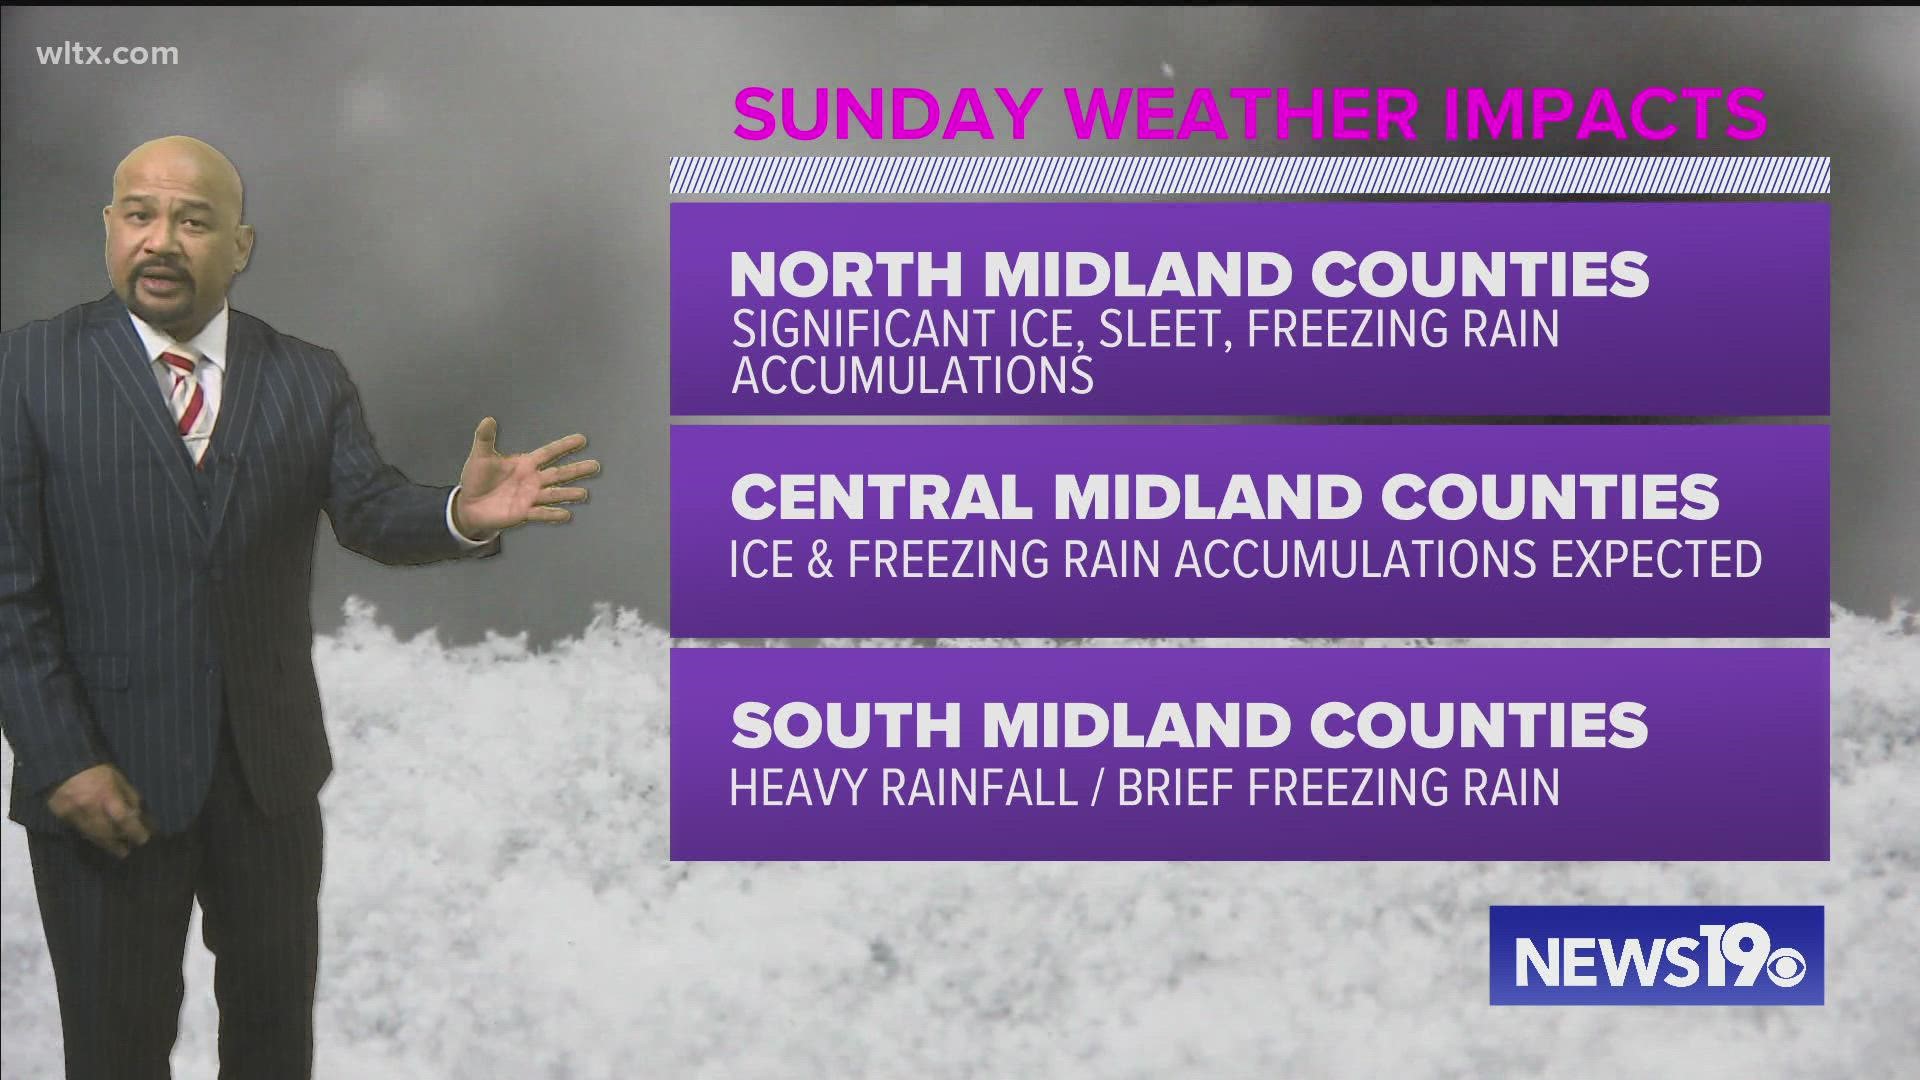 Rain is expected throughout the day on Sunday, but a period of icy conditions or sleet is possible and could produce power outages and dangerous travel.